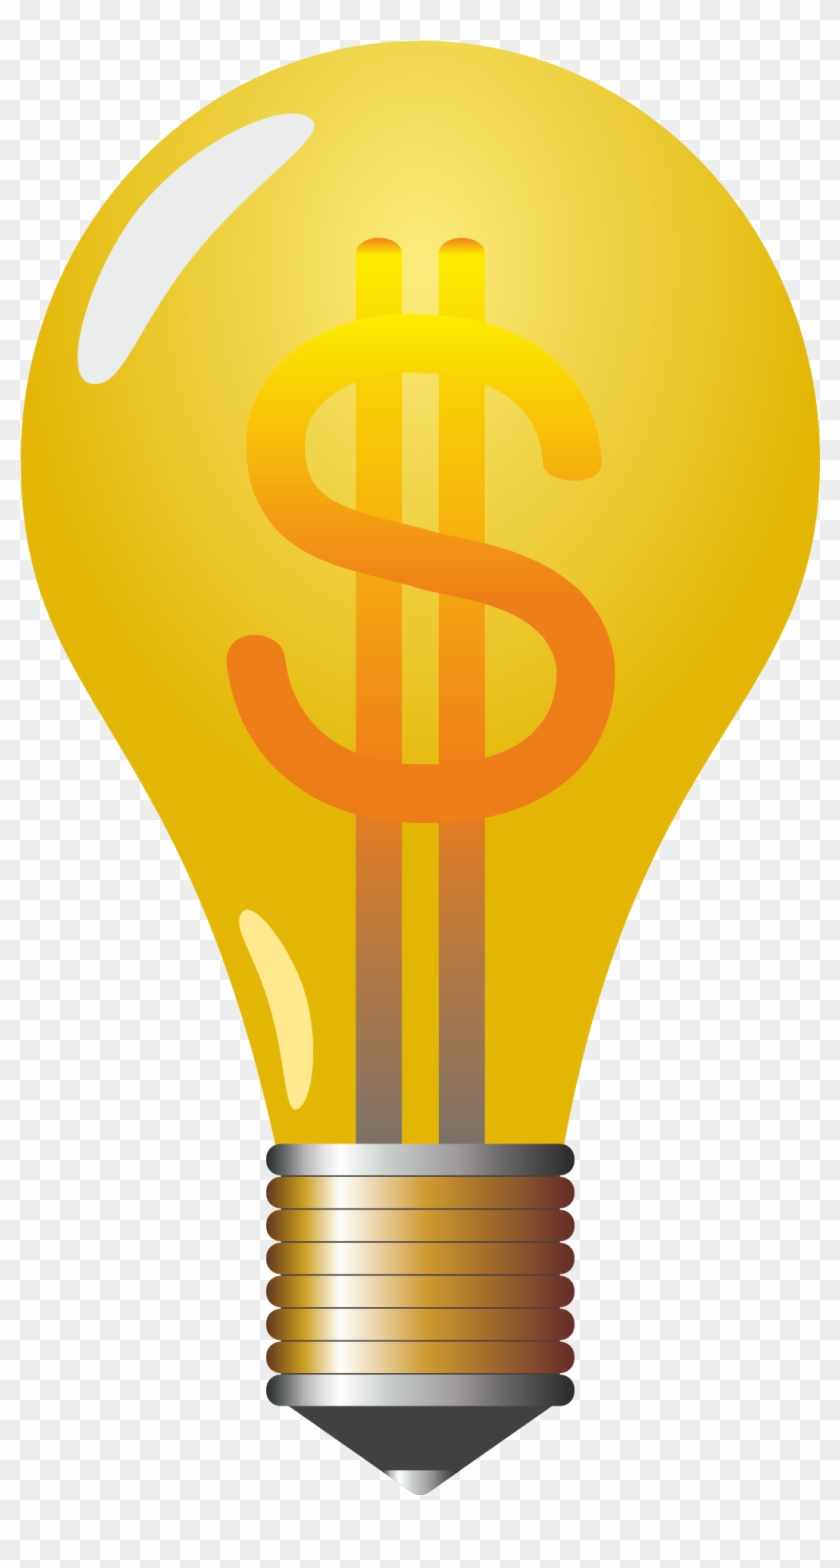 Light Bulb Clipart Importance Pencil And In Color Light - Lamp #201704